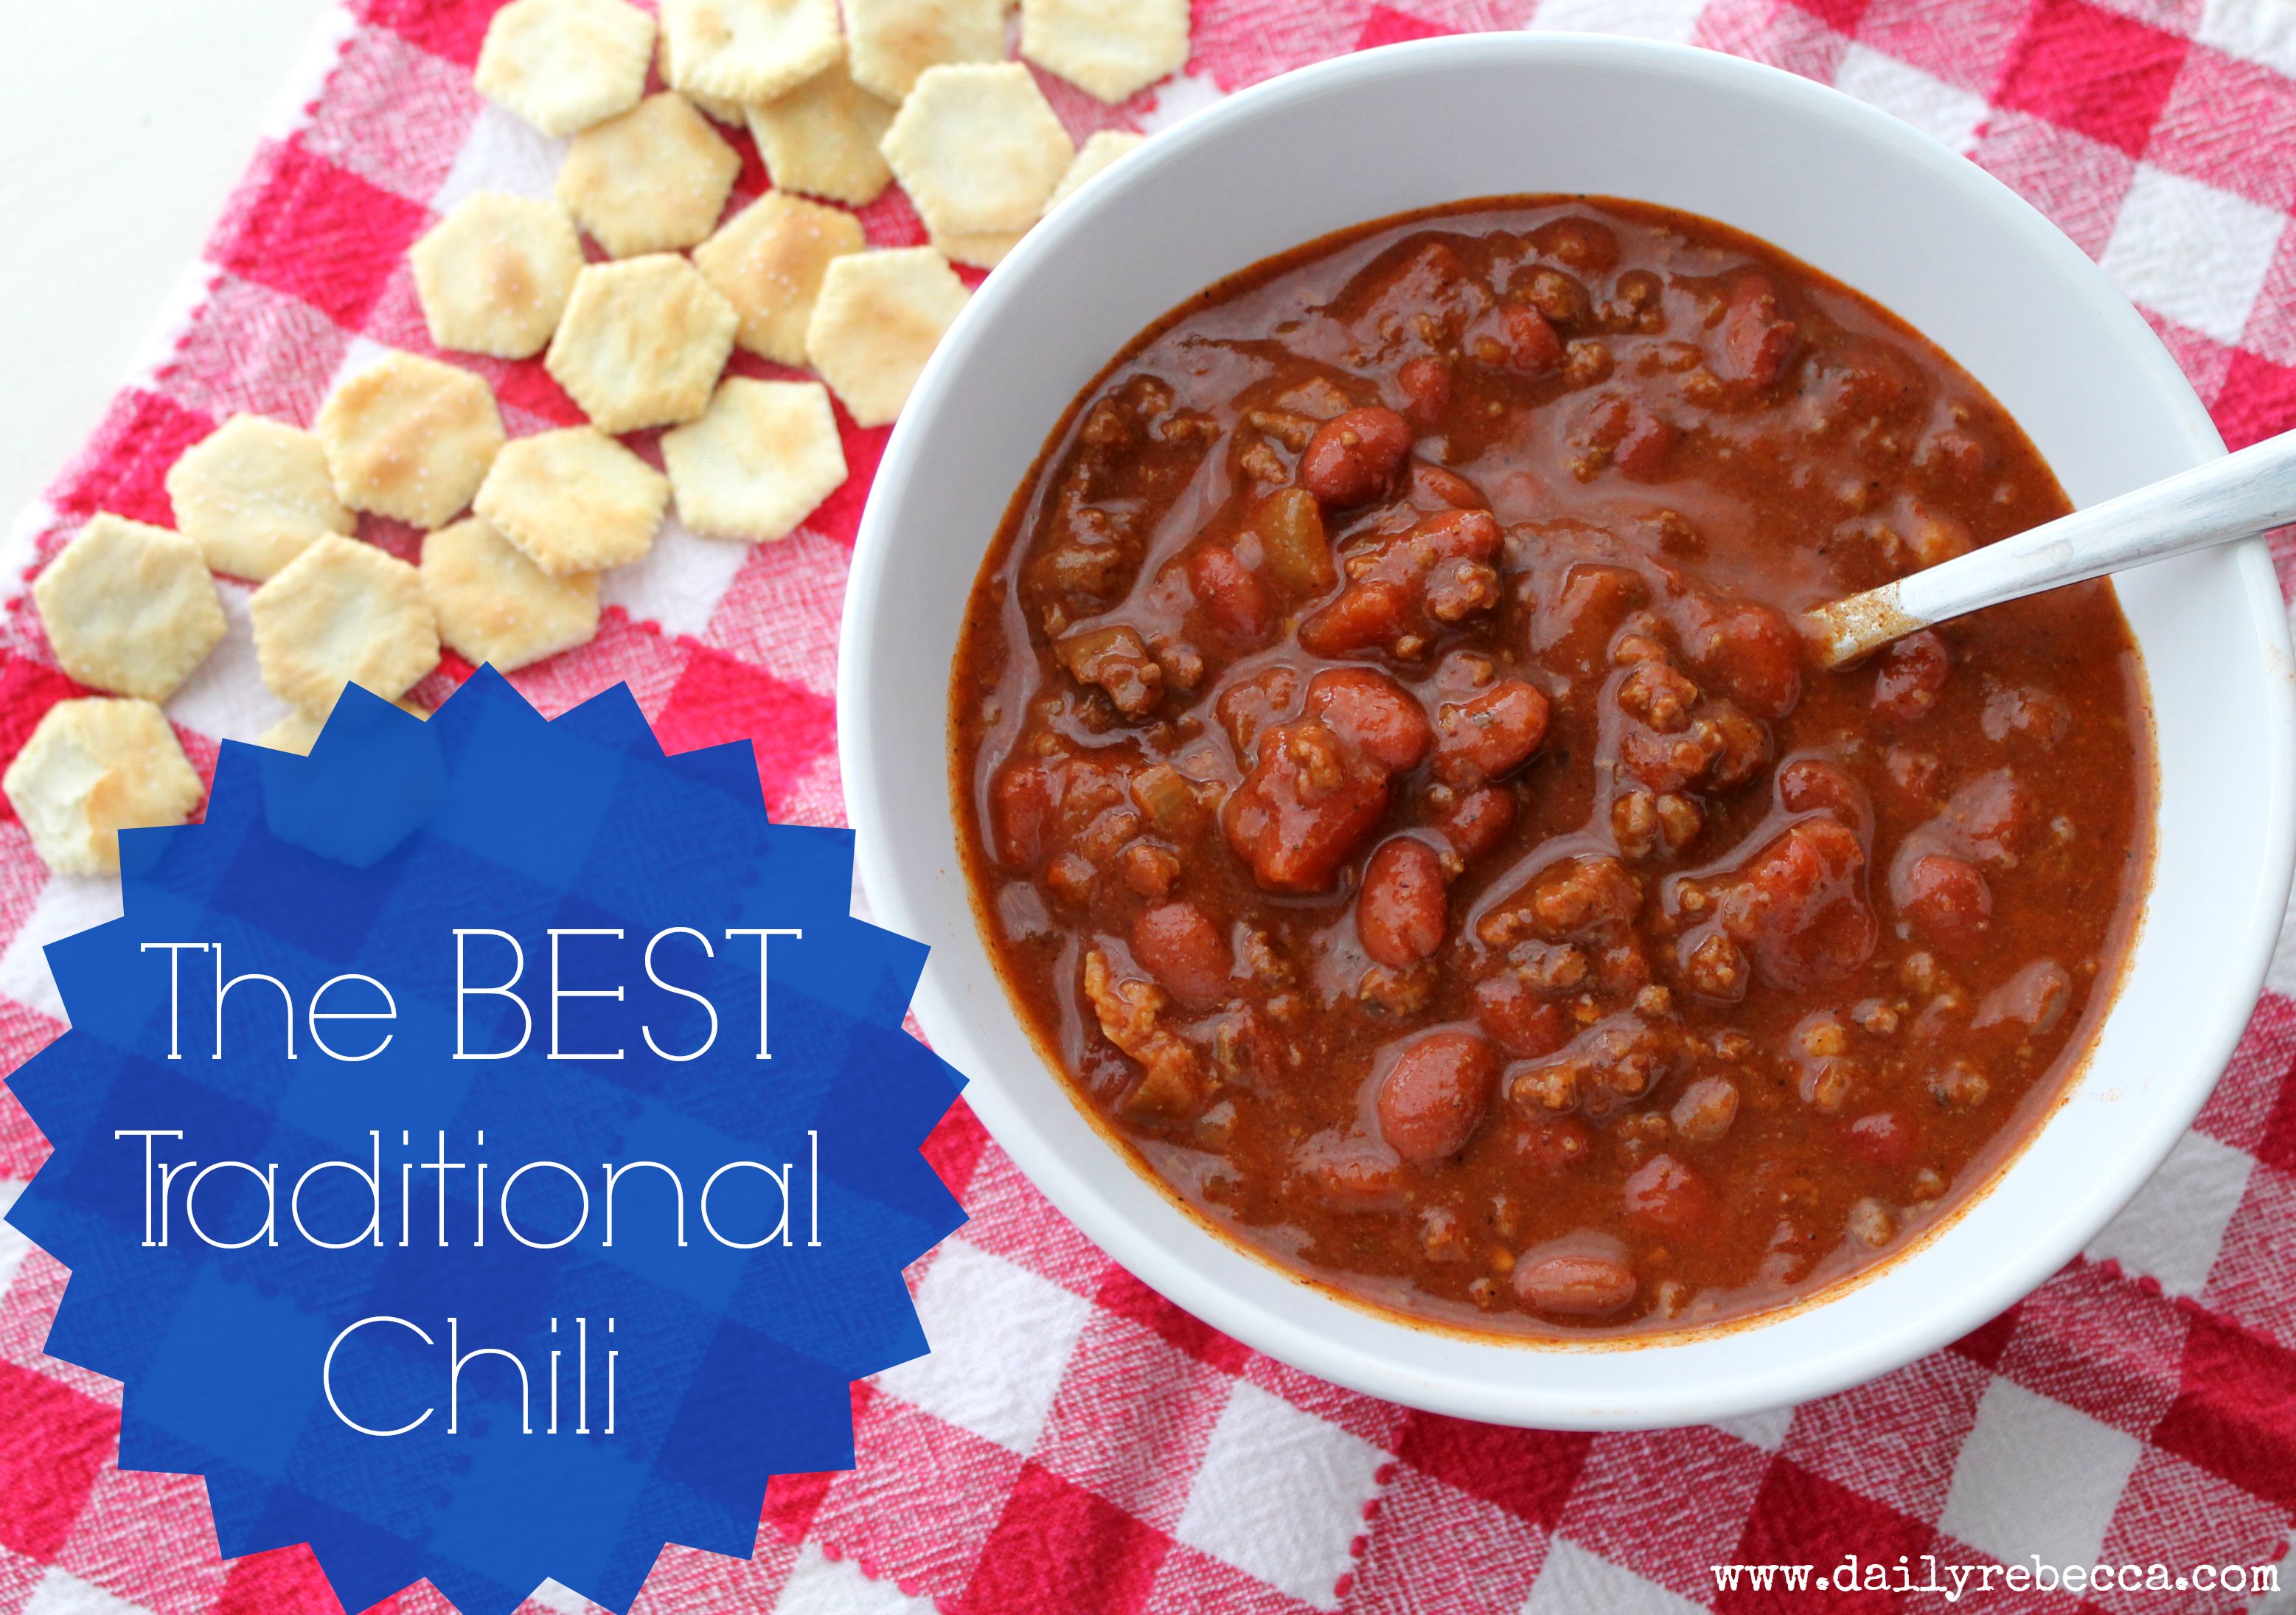 The Best Traditional Chili Daily Rebecca